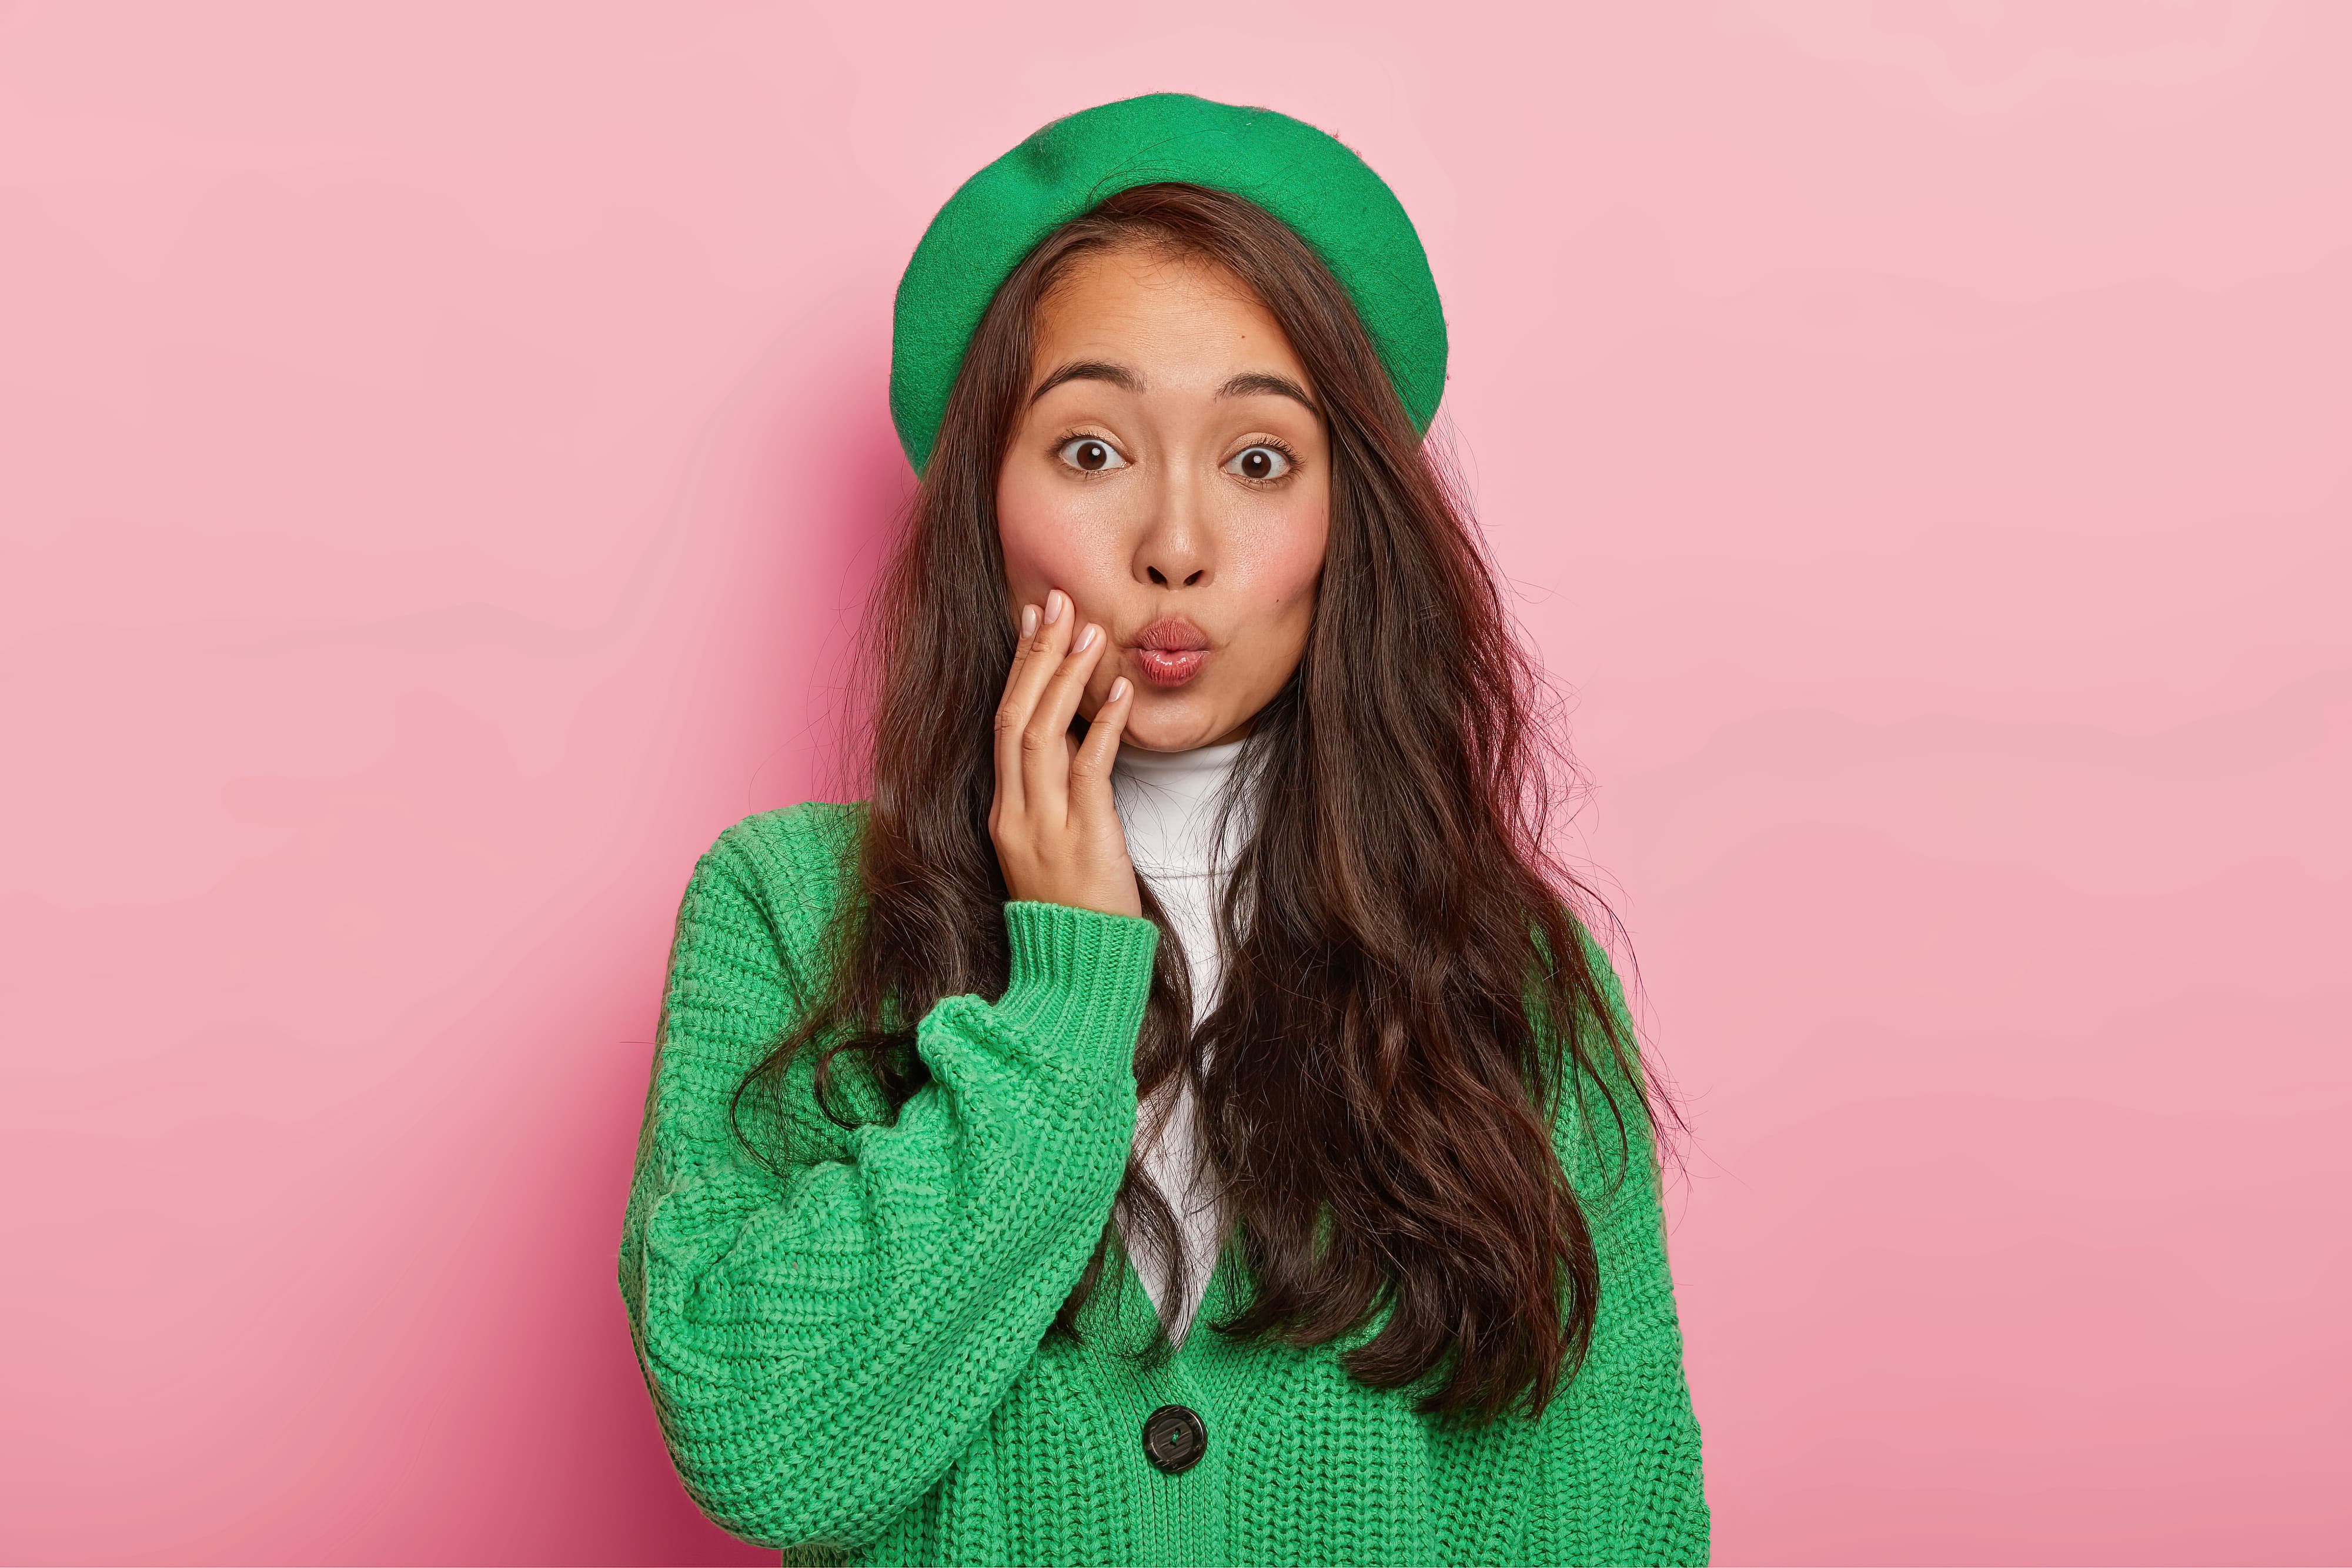 Portrait of good looking Asian lady with dark hair, keeps lips rounded, wants to kiss boyfriend, wears green beret and sweater, poses against pink background